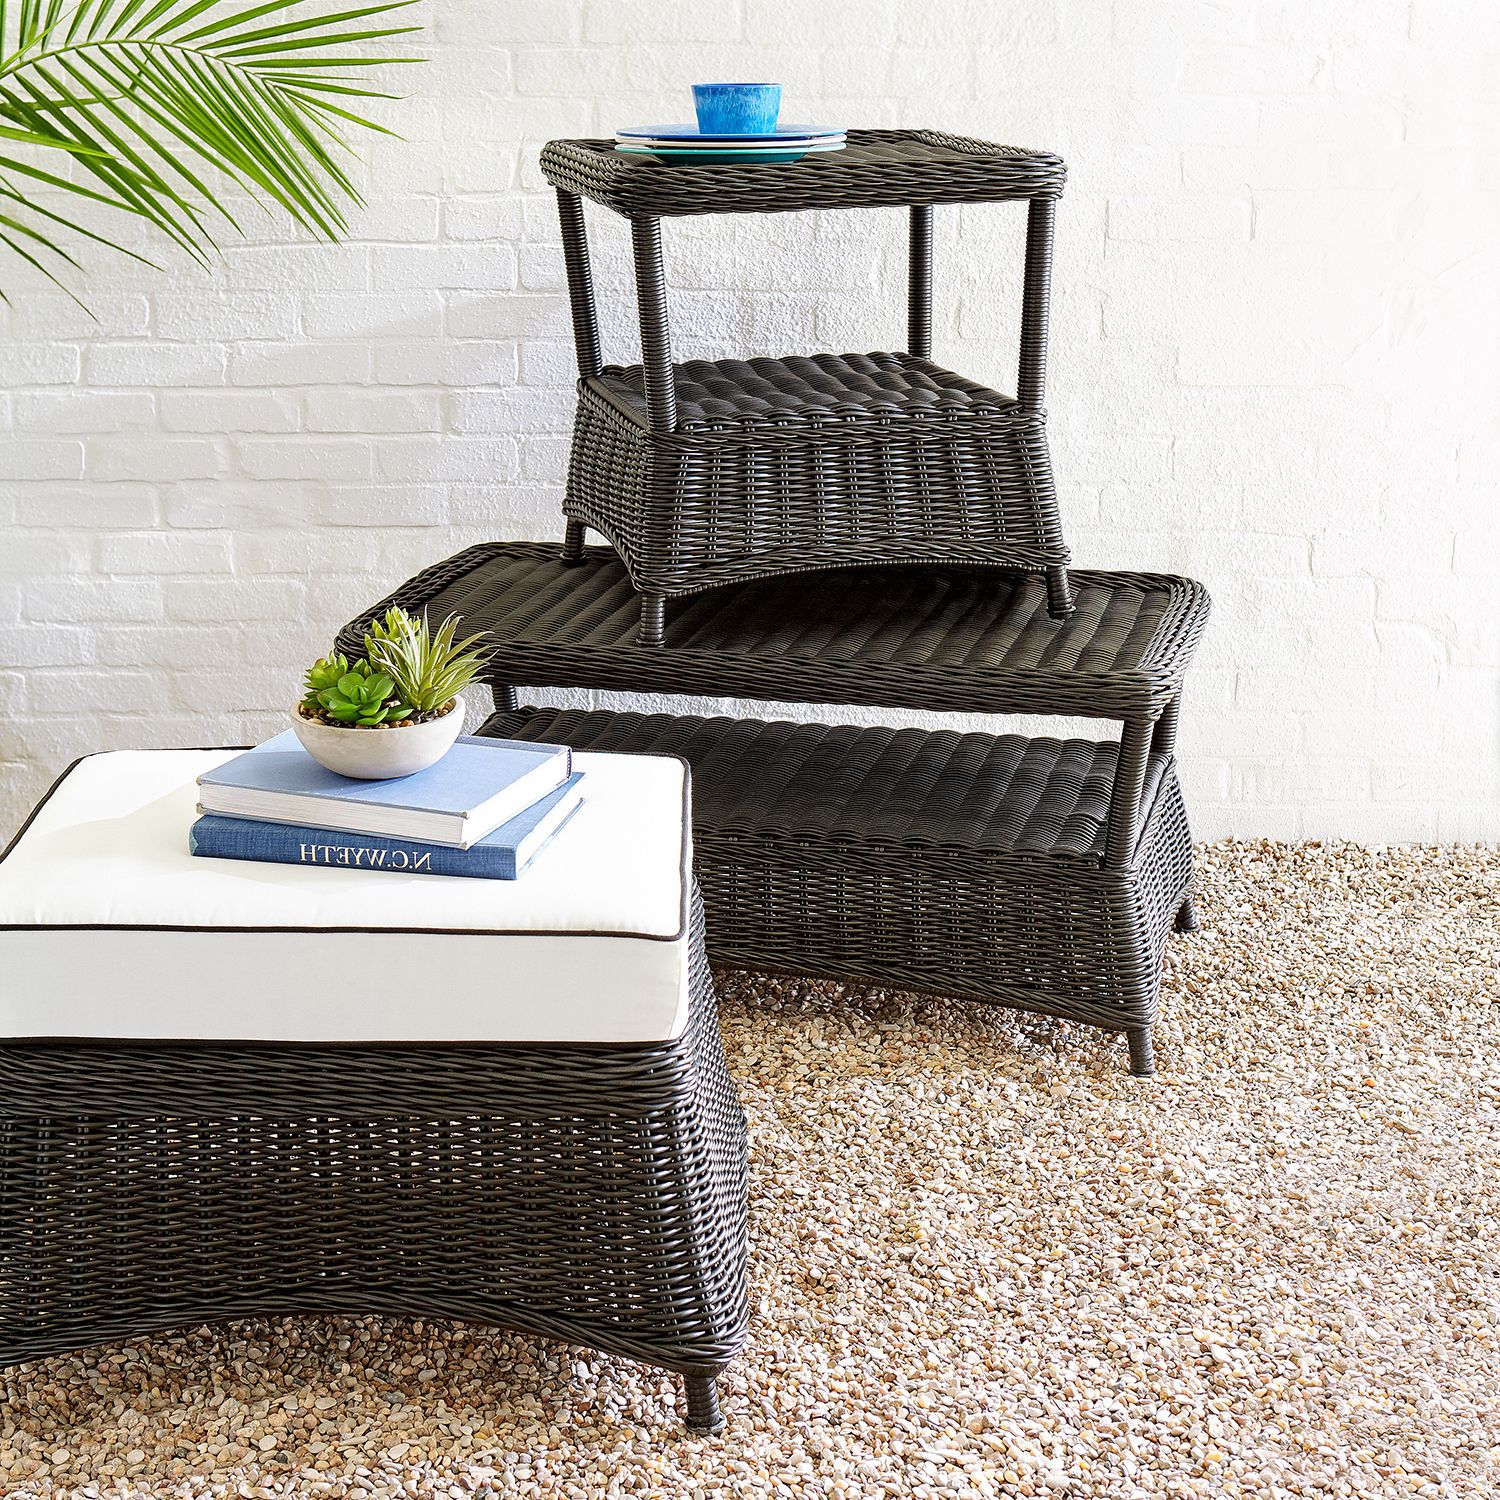 Widely Used Black Wicker Ottoman With Cushion – Pier1 Intended For Black And Off White Rattan Ottomans (View 8 of 10)